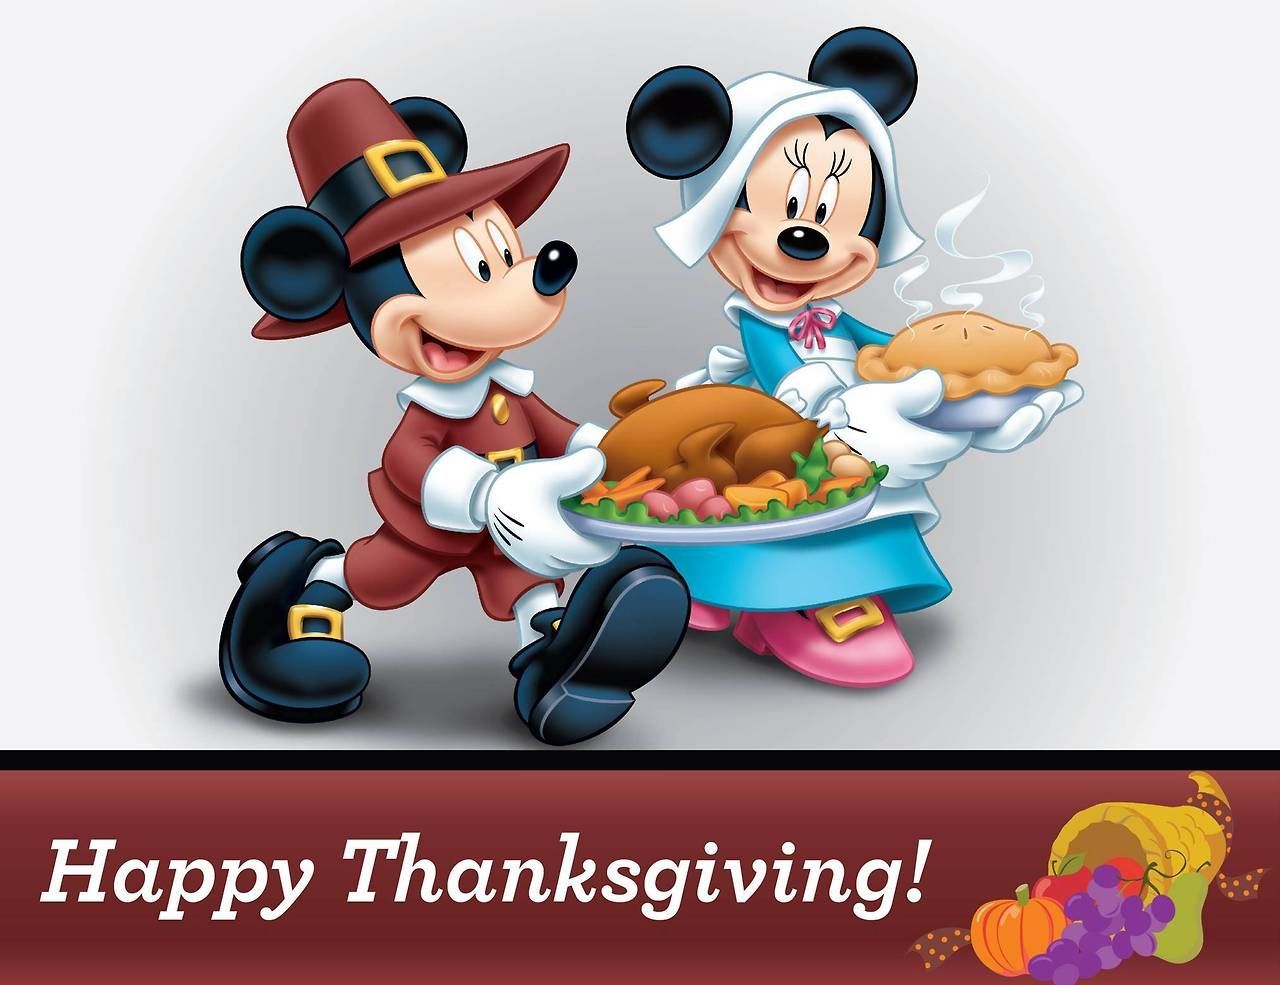 Disney Mickey And Minnie Mouse Thanksgiving Wallpaper Page. Disney thanksgiving, Happy thanksgiving wallpaper, Happy thanksgiving